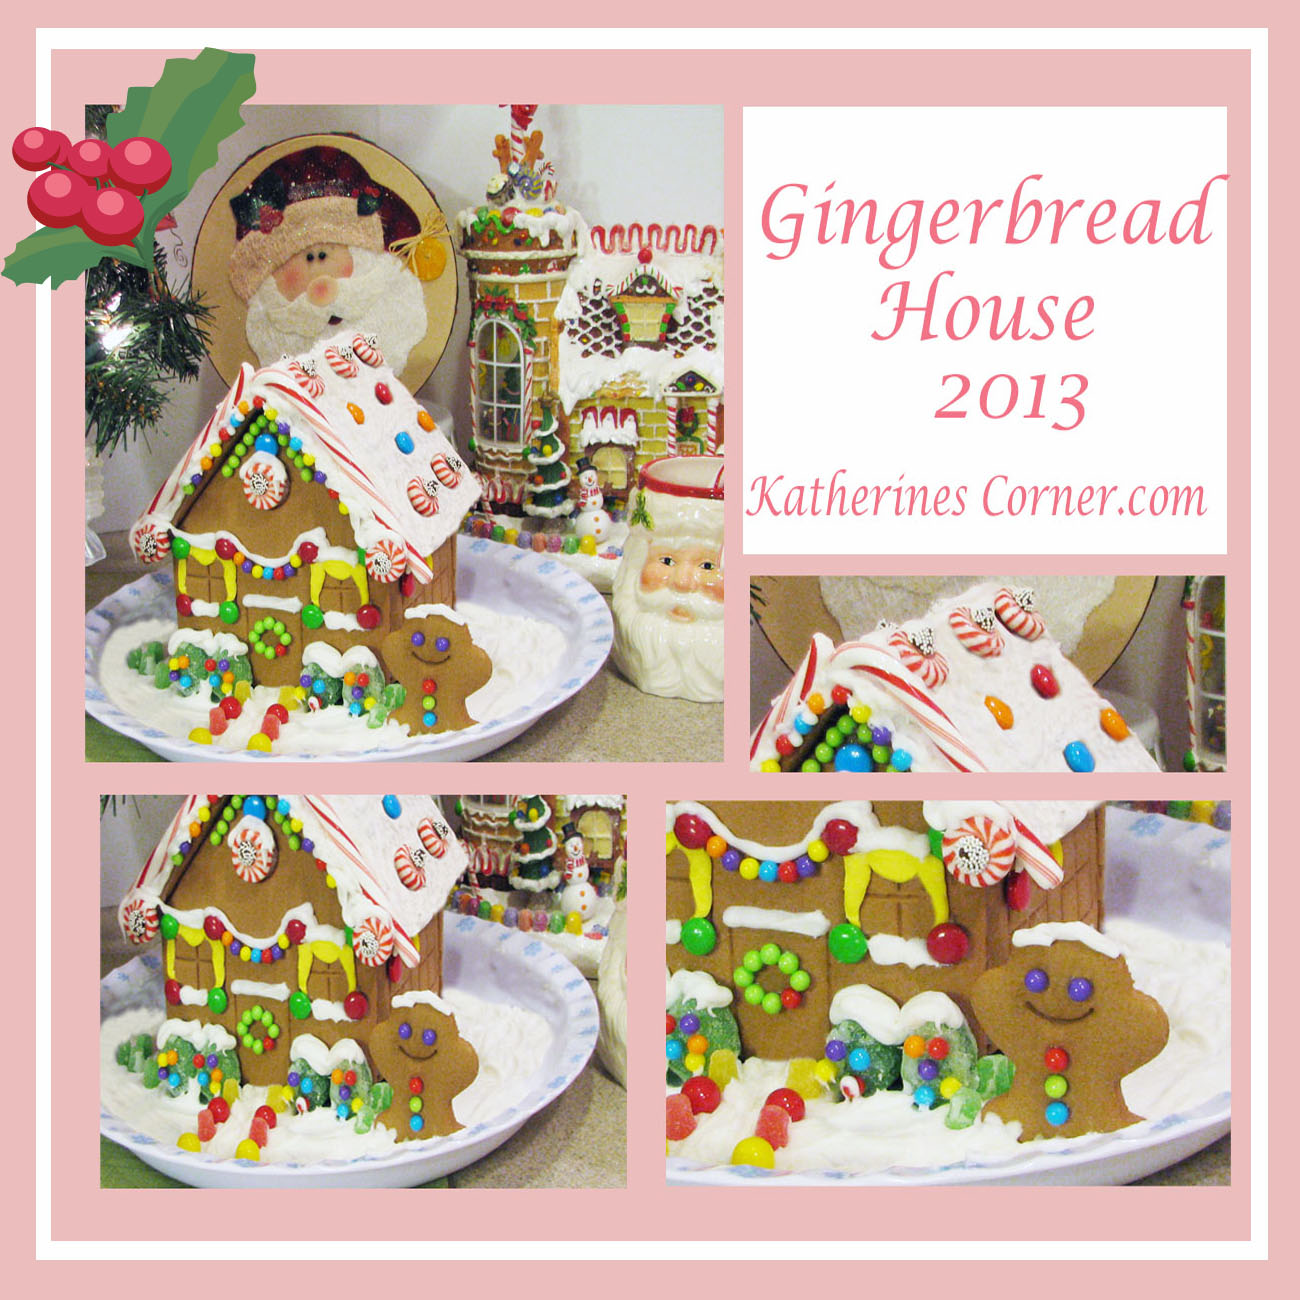 Gingerbread House Tour